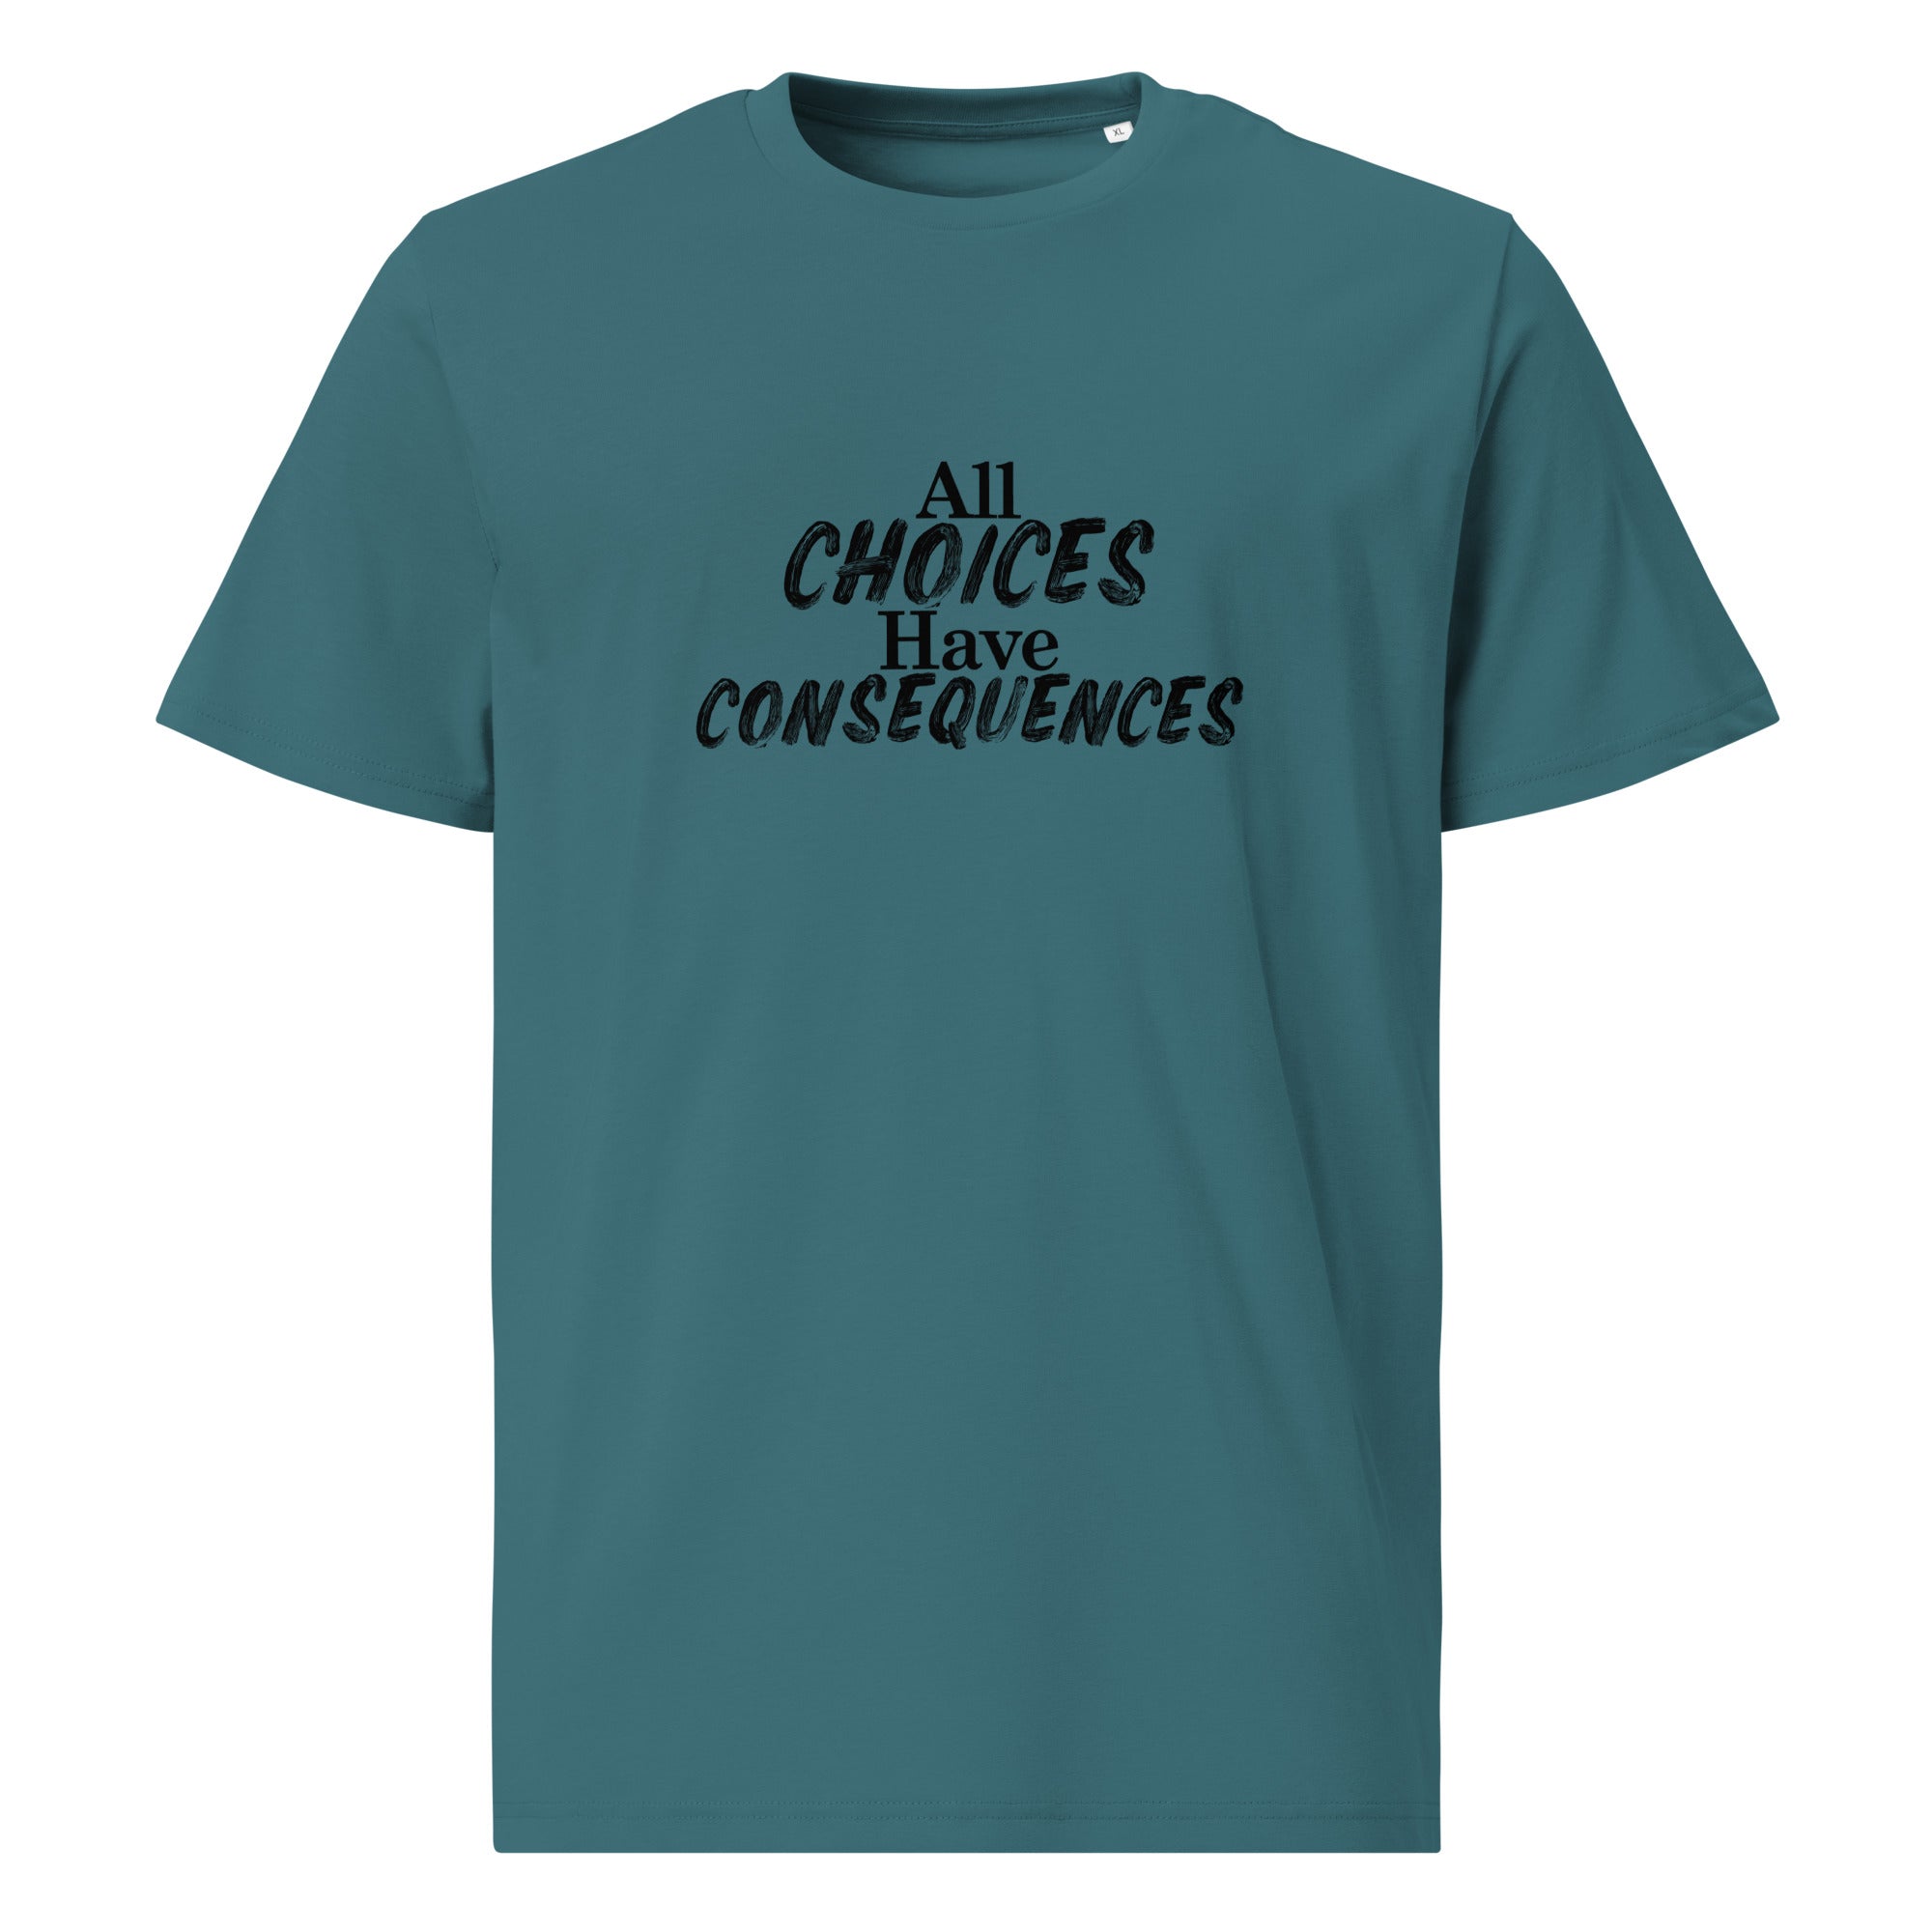 All Choices Have Consequences Tee